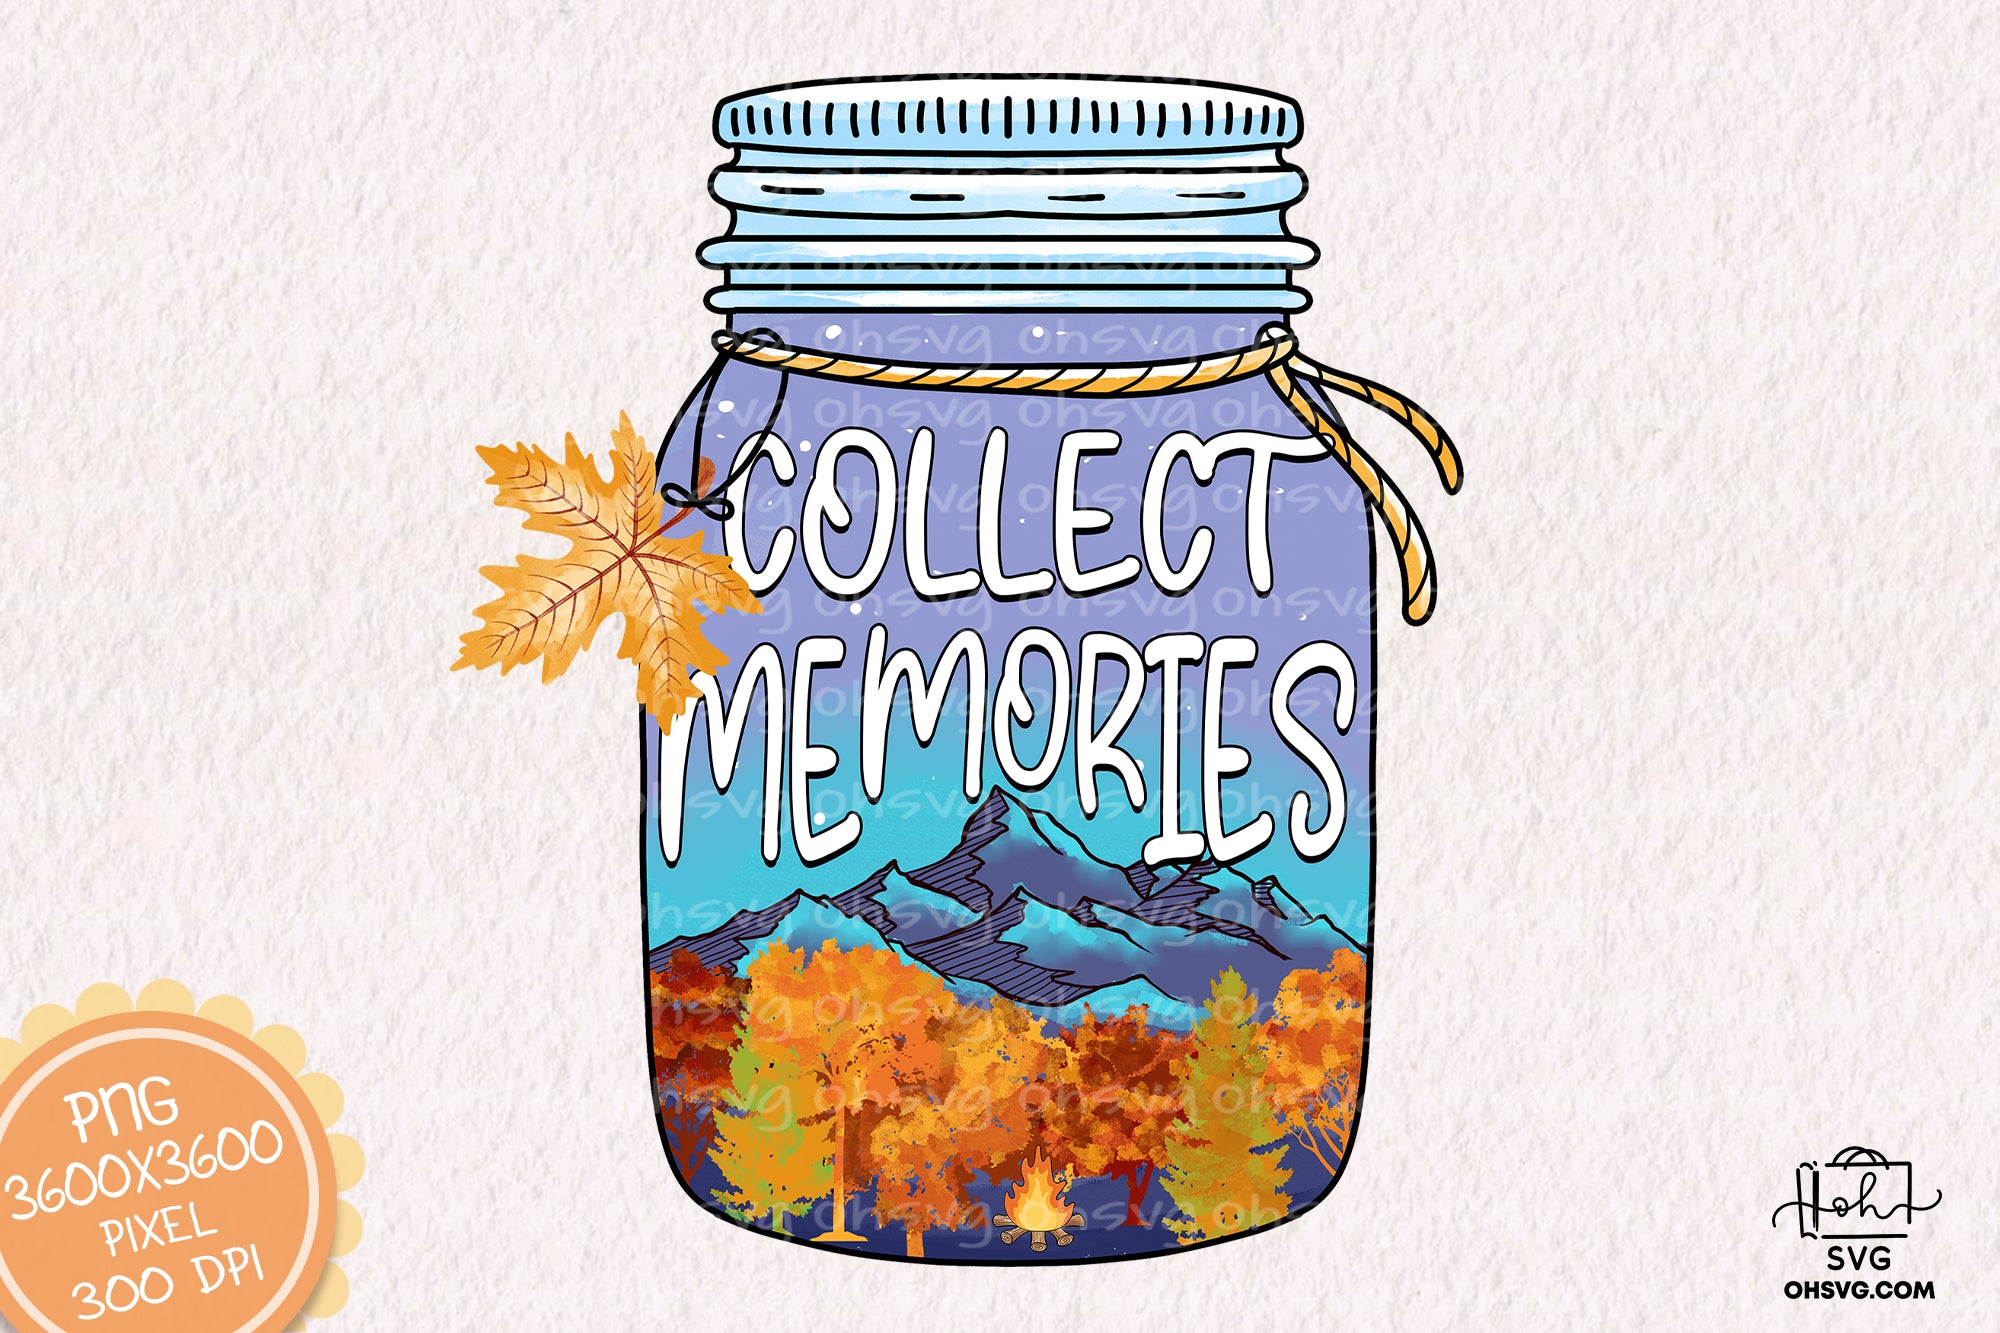 Collect Memories Sublimation PNG, Camping Life PNG, Camping Outdoor PNG